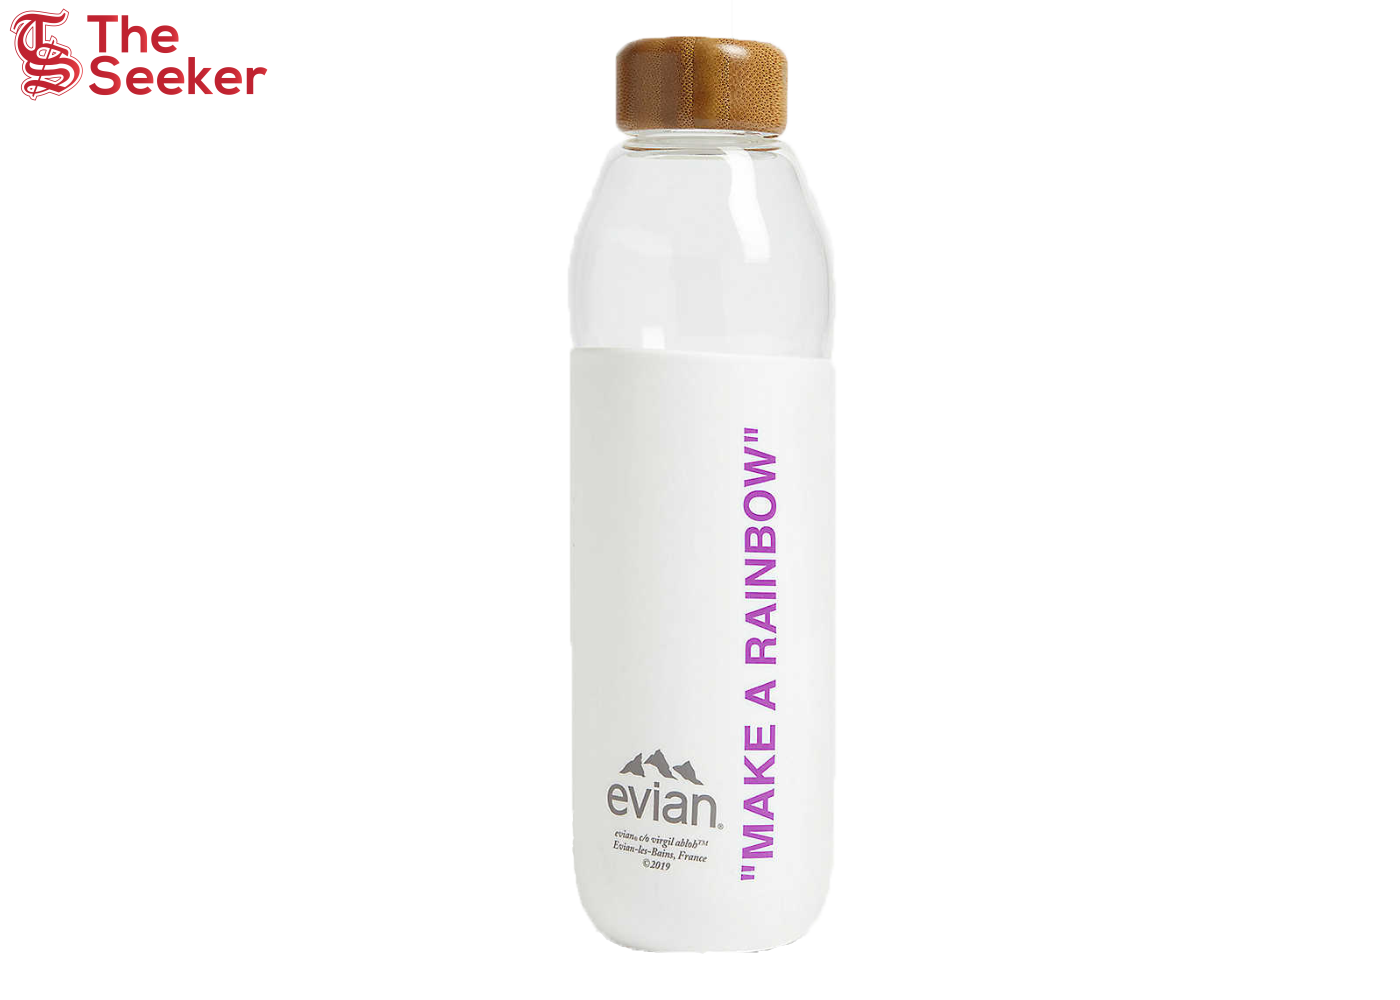 EVIAN BY VIRGIL ABLOH x SOMA Make A Rainbow Refillable Glass Water Bottle White/Purple